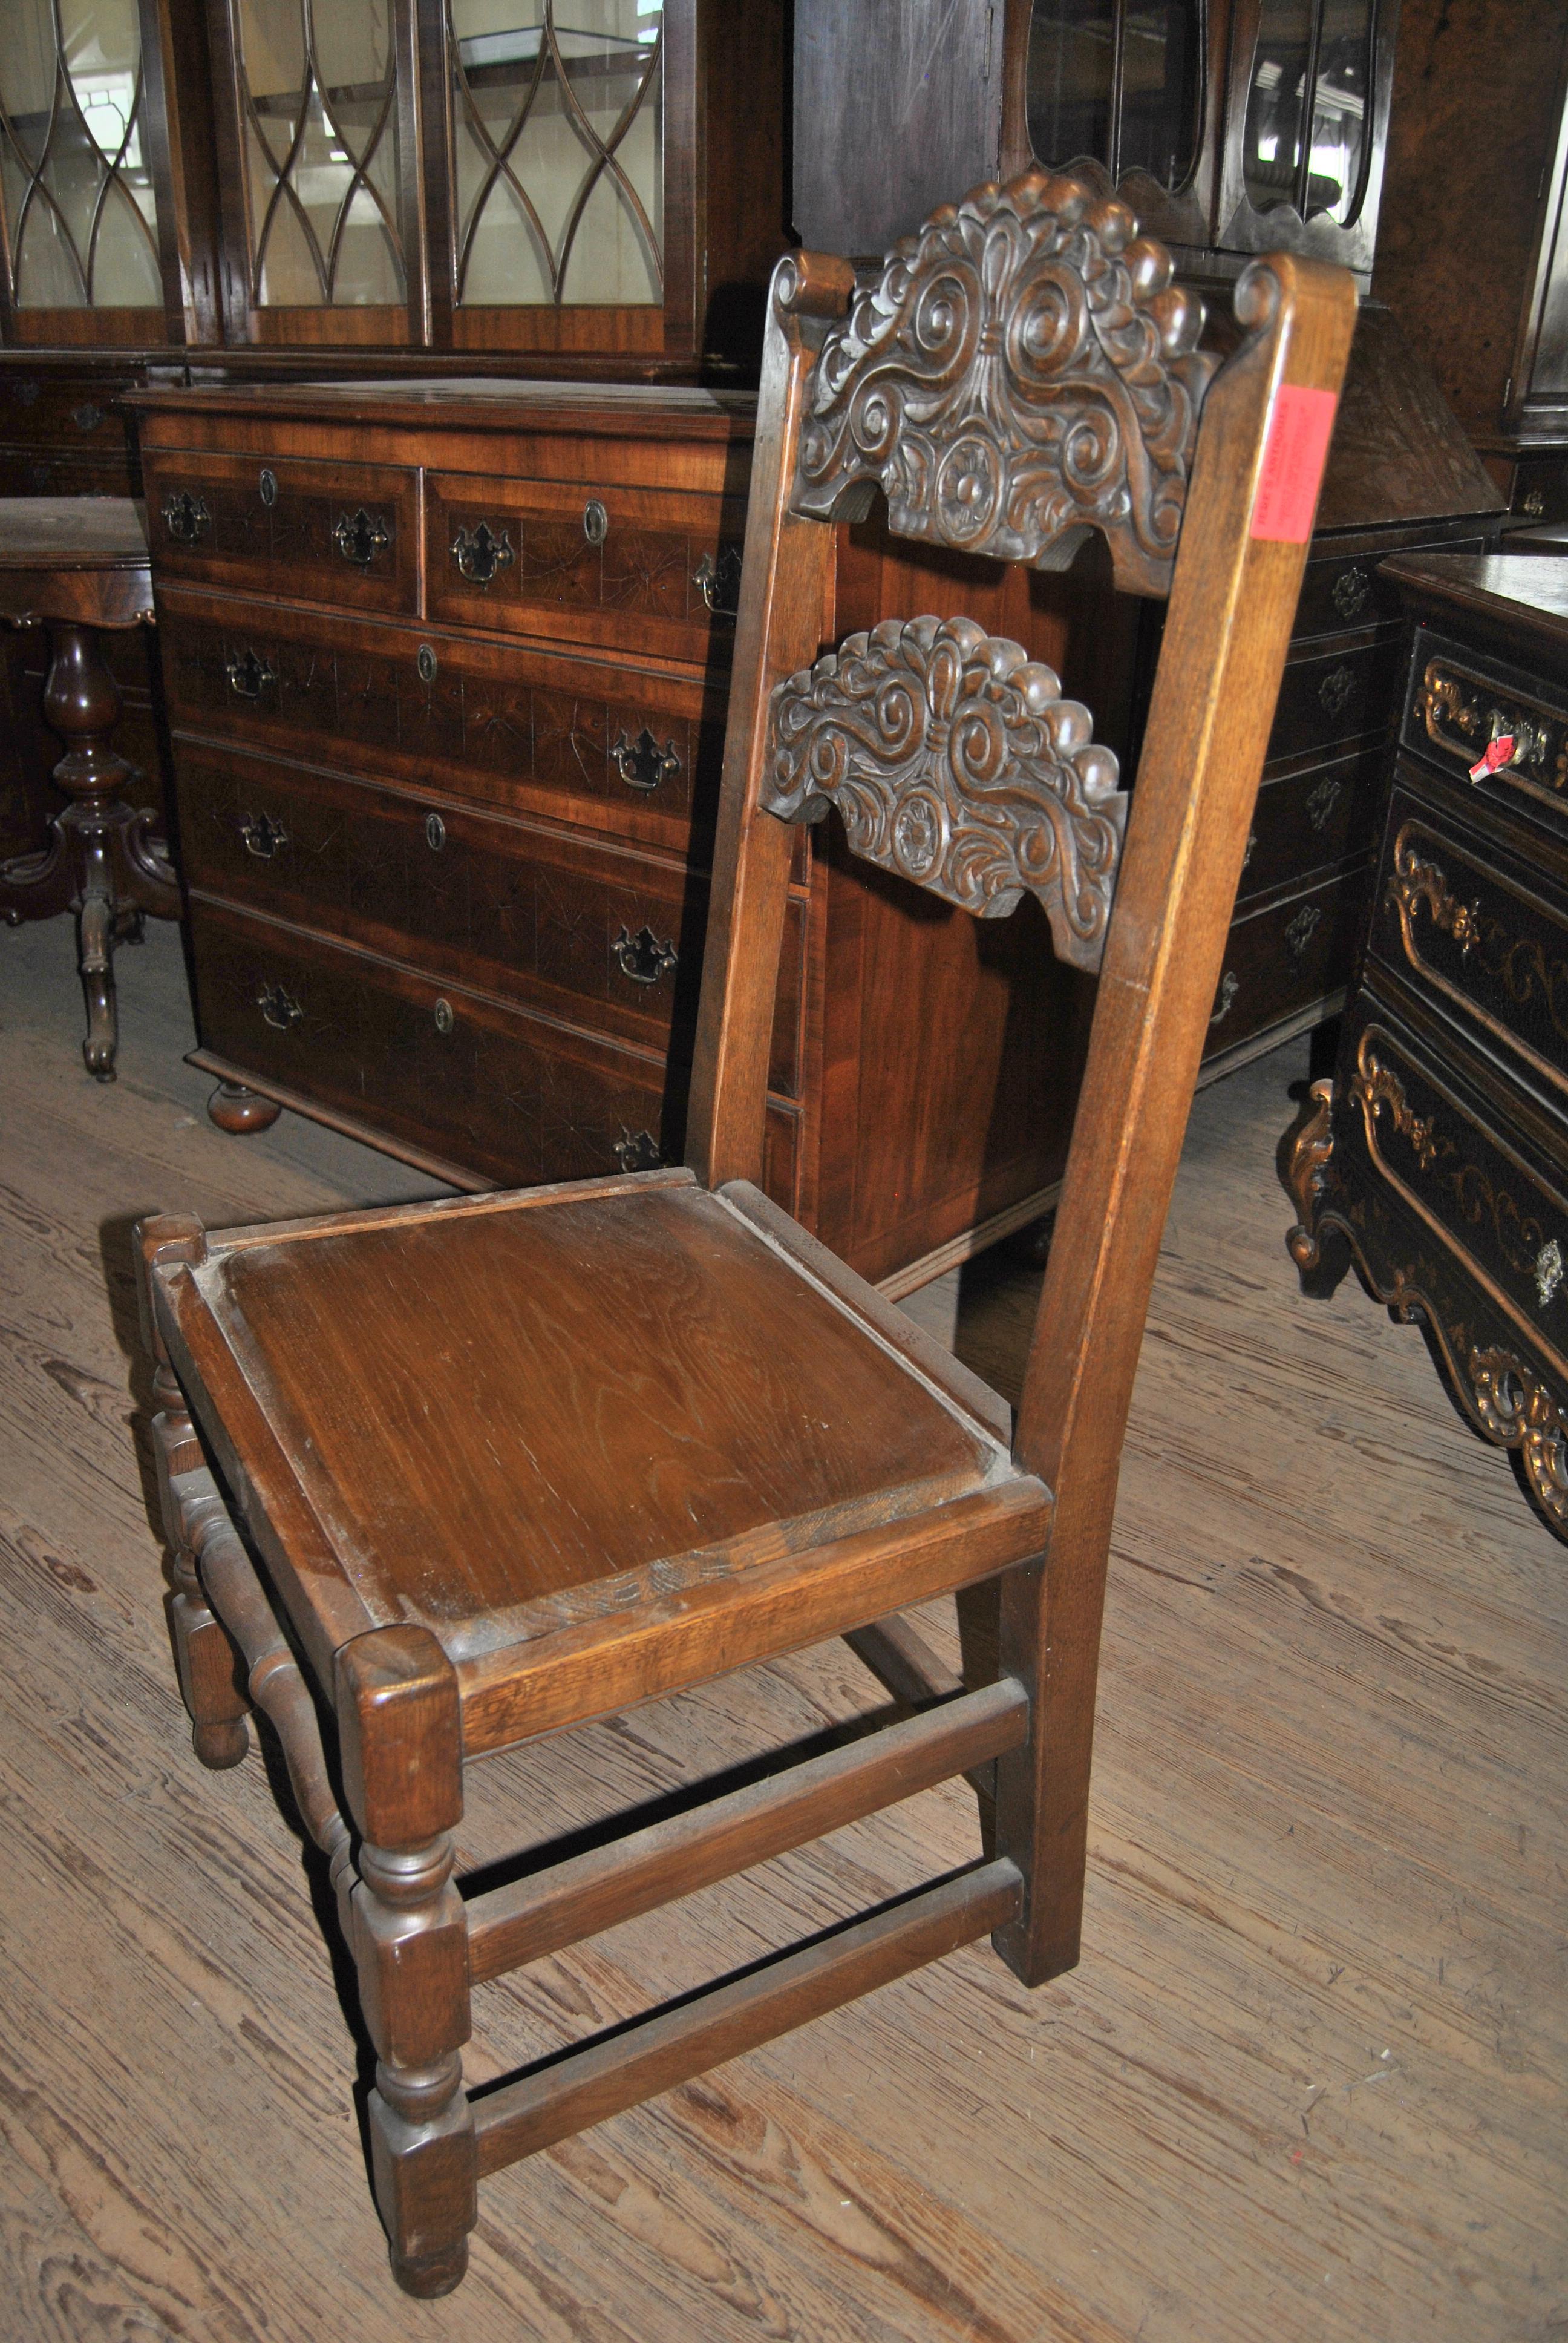 This is a matched set of 8 side chairs, in the Jacobean style, made in England, circa 1920. The chairs are made of solid oak. The back uprights curl over at the top of each chair. There are 2 heavily and finely carved splats across the back of each